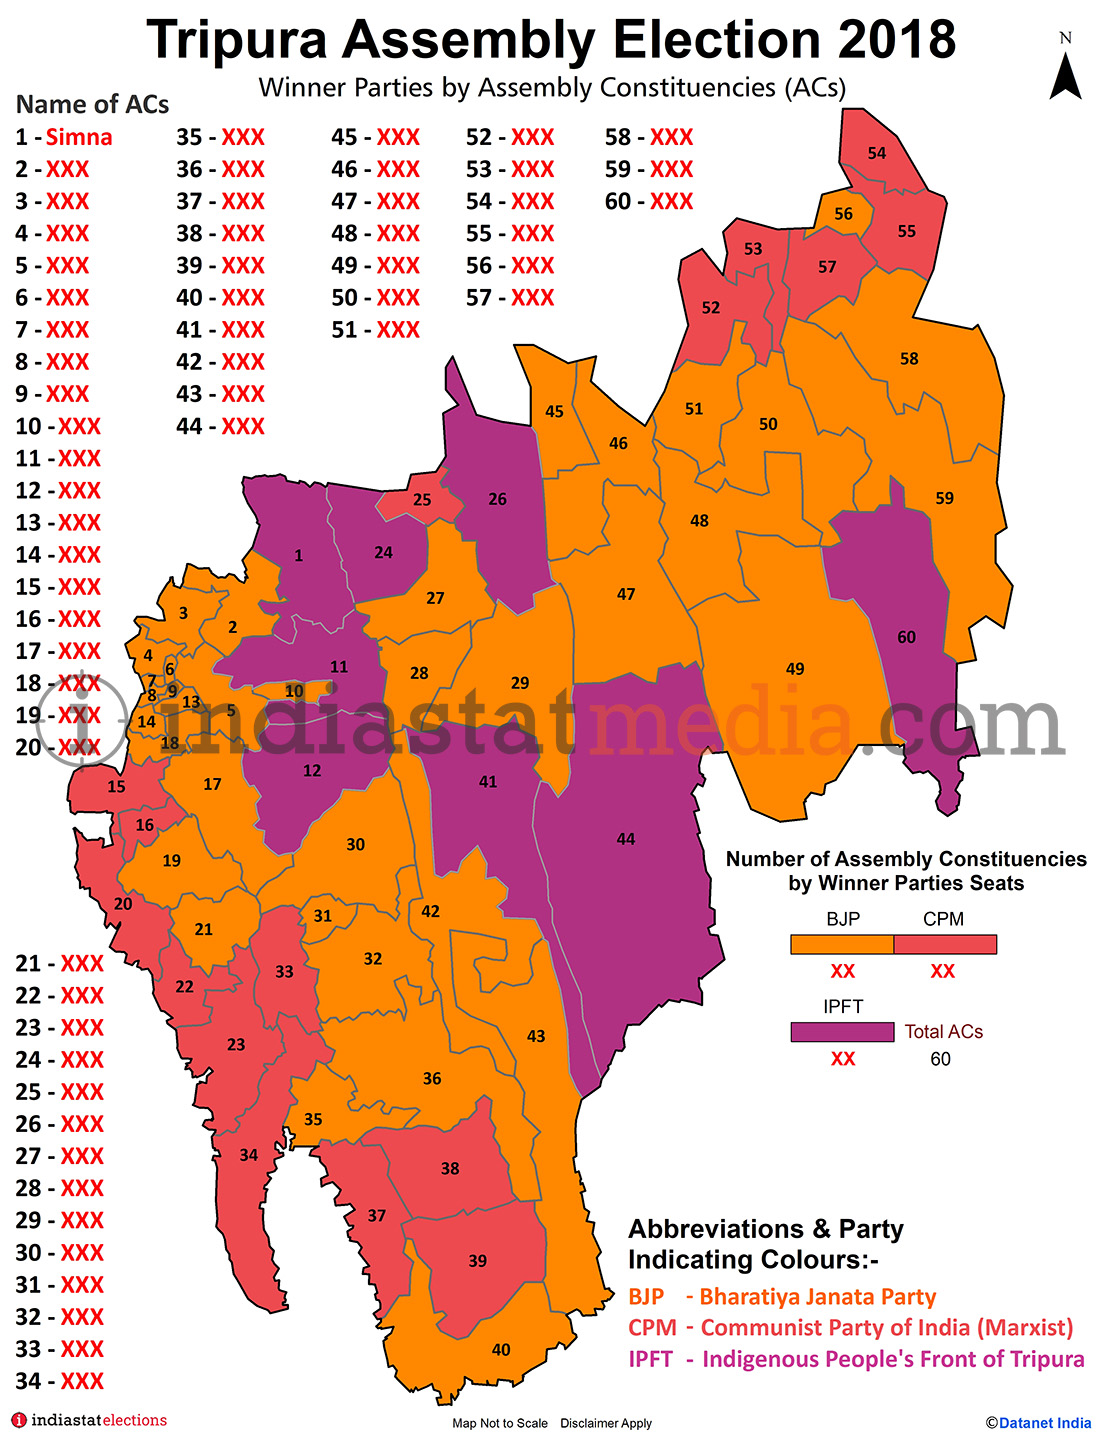 Winner Parties by Assembly Constituencies in Tripura (Assembly Election - 2018)